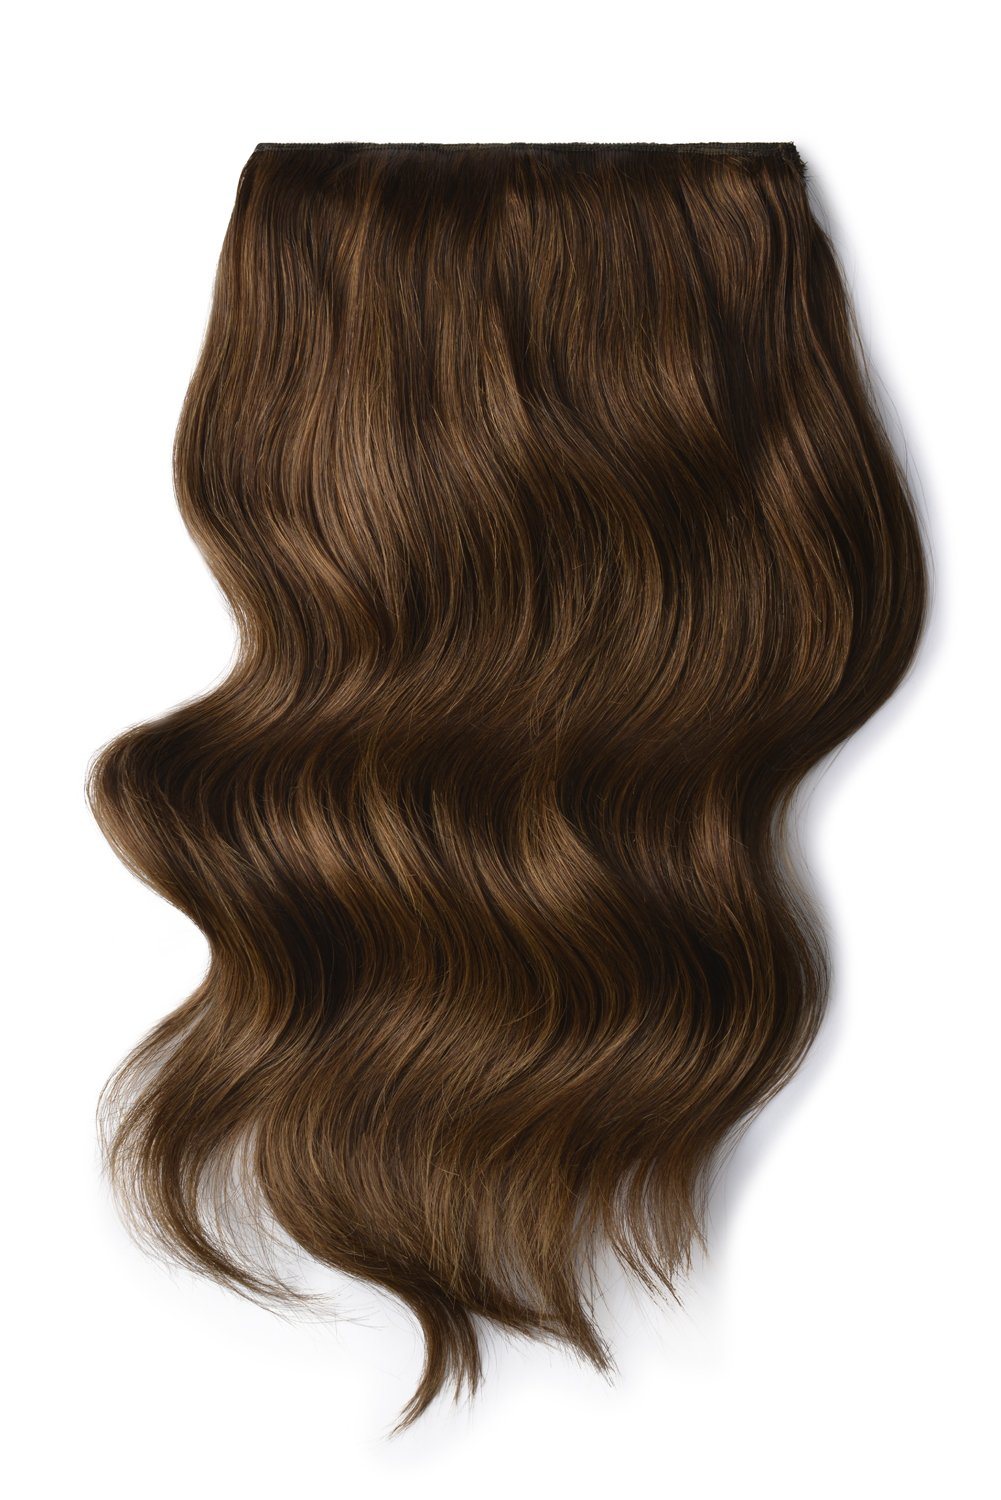 Double Wefted Full Head Remy Clip in Human Hair Extensions - Light/Chestnut Brown (#6)